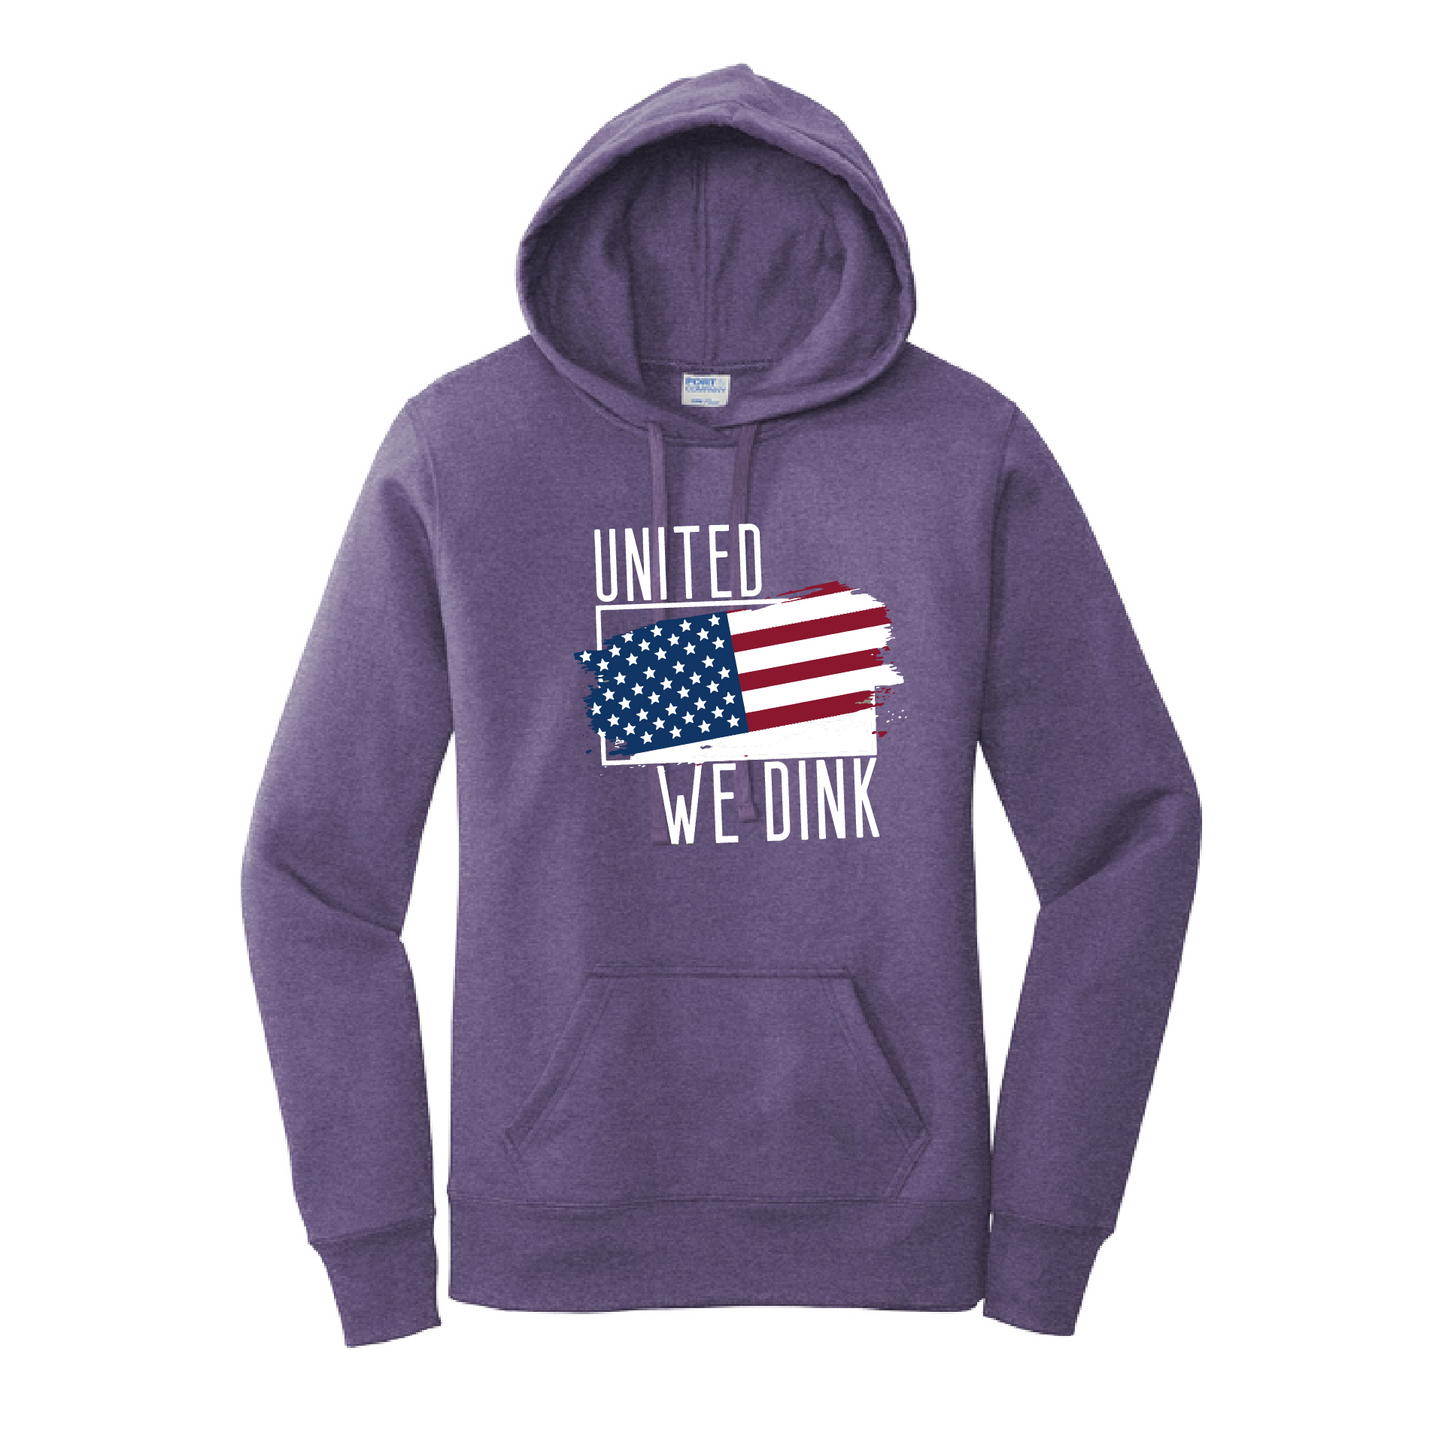 Pickleball Design: United We Dink.   Women's Hooded pullover Sweatshirt  Turn up the volume in this Women's Sweatshirts with its perfect mix of softness and attitude. Ultra soft lined inside with a lined hood also. This is fitted nicely for a women's figure. Front pouch pocket.